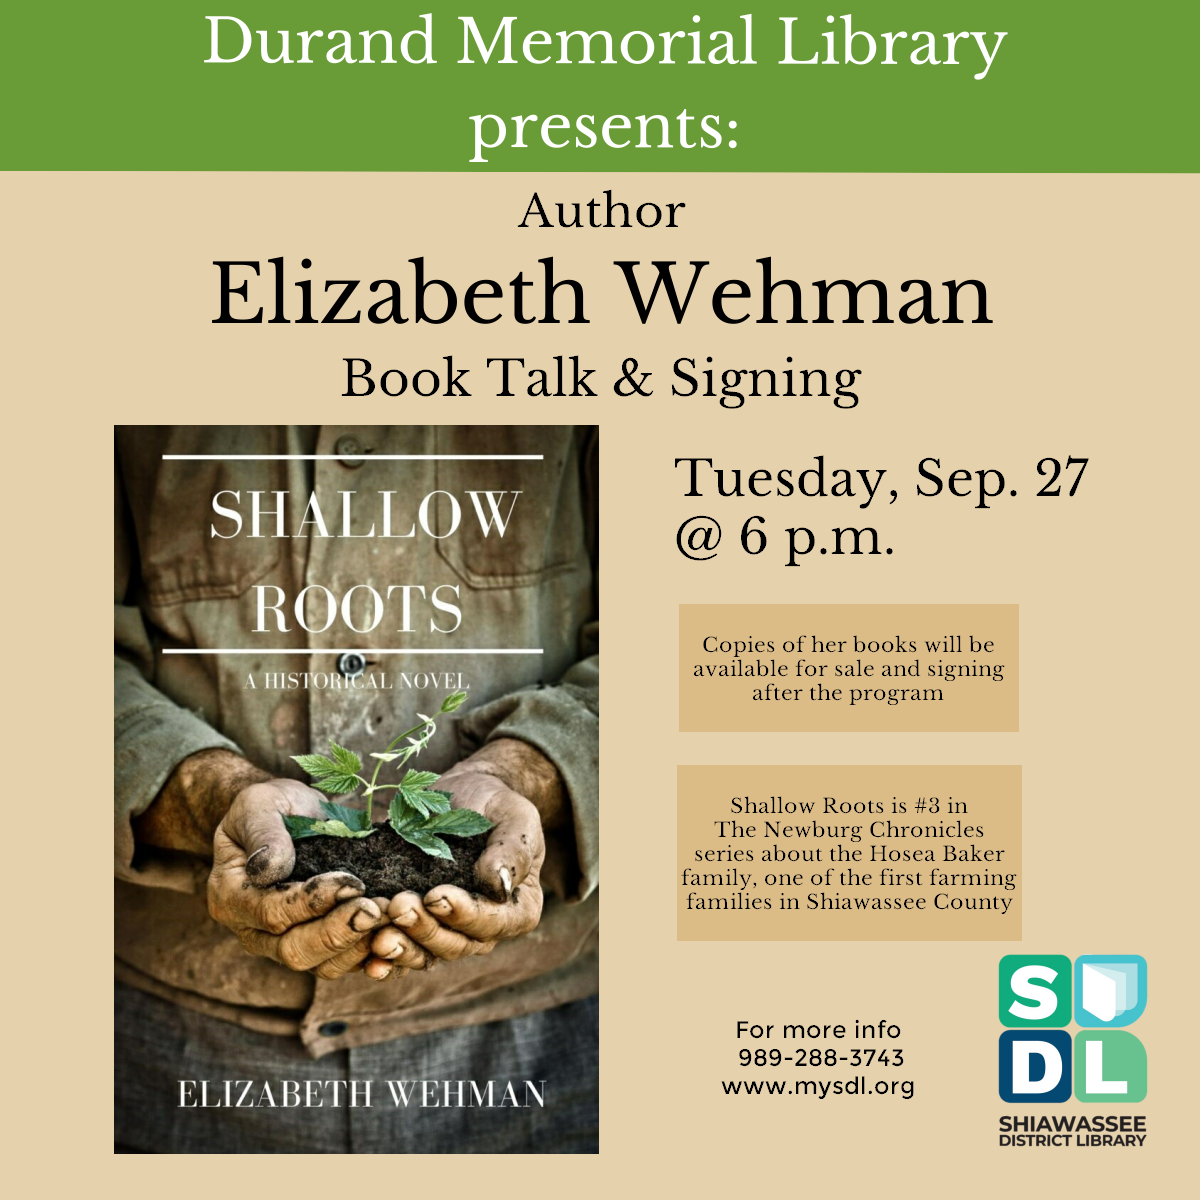 Beth Wehman book talk and signing at the Durand Memorial Library September 27 at 6 p.m. 